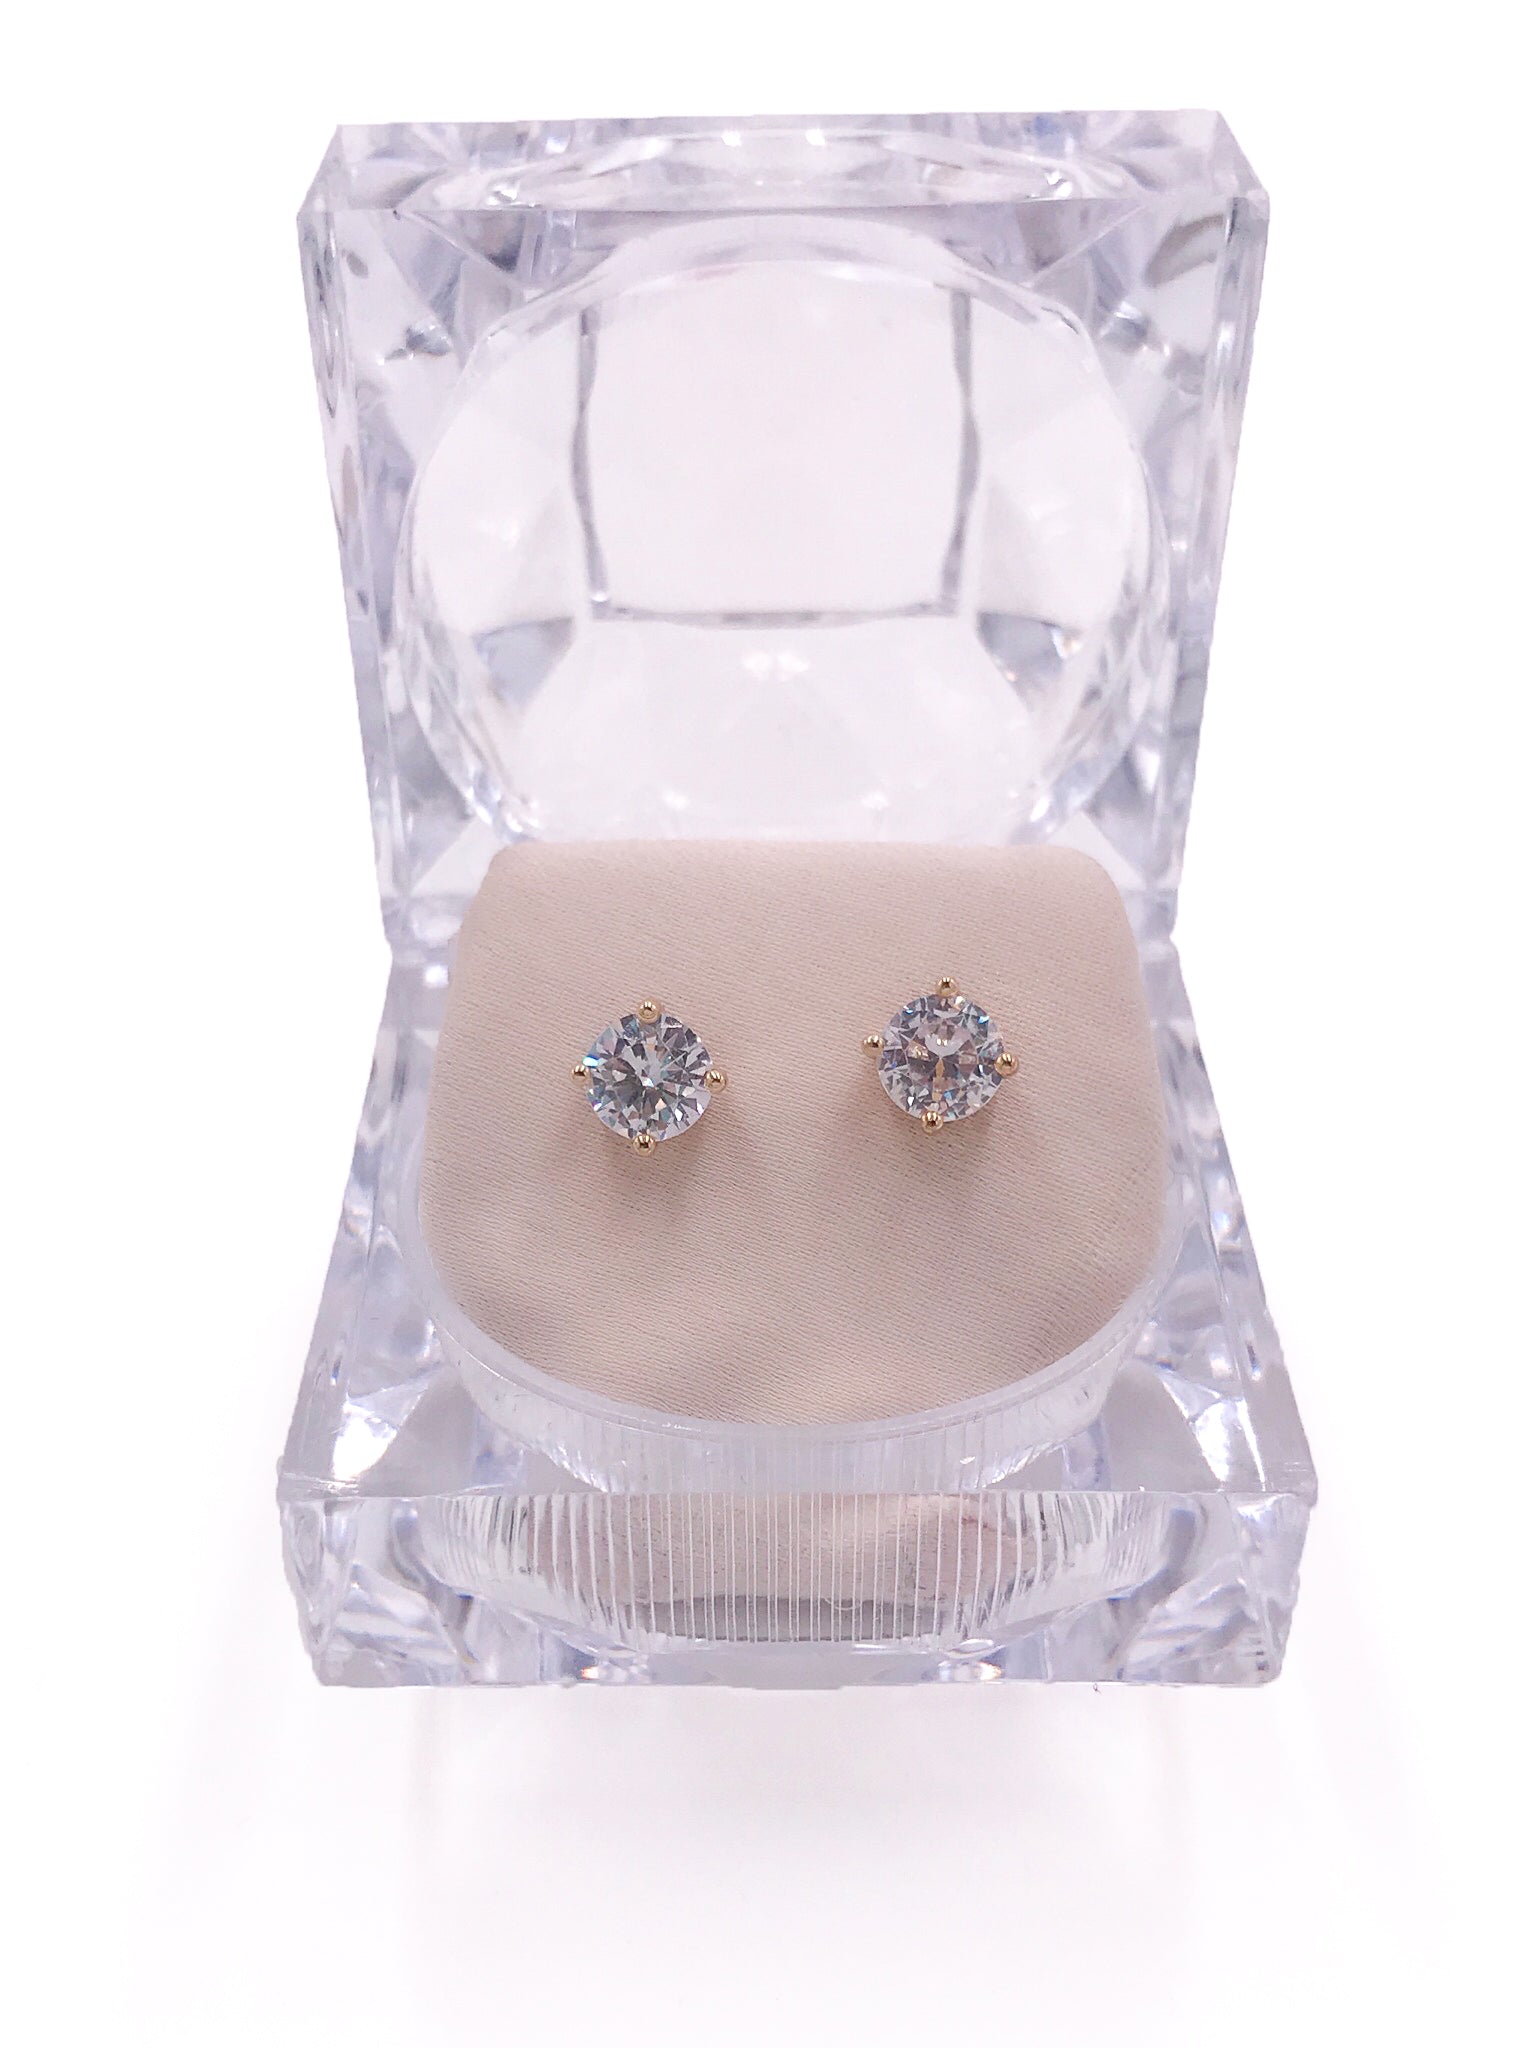 Get the Perfect Blue Diamond Earrings | GLAMIRA.in